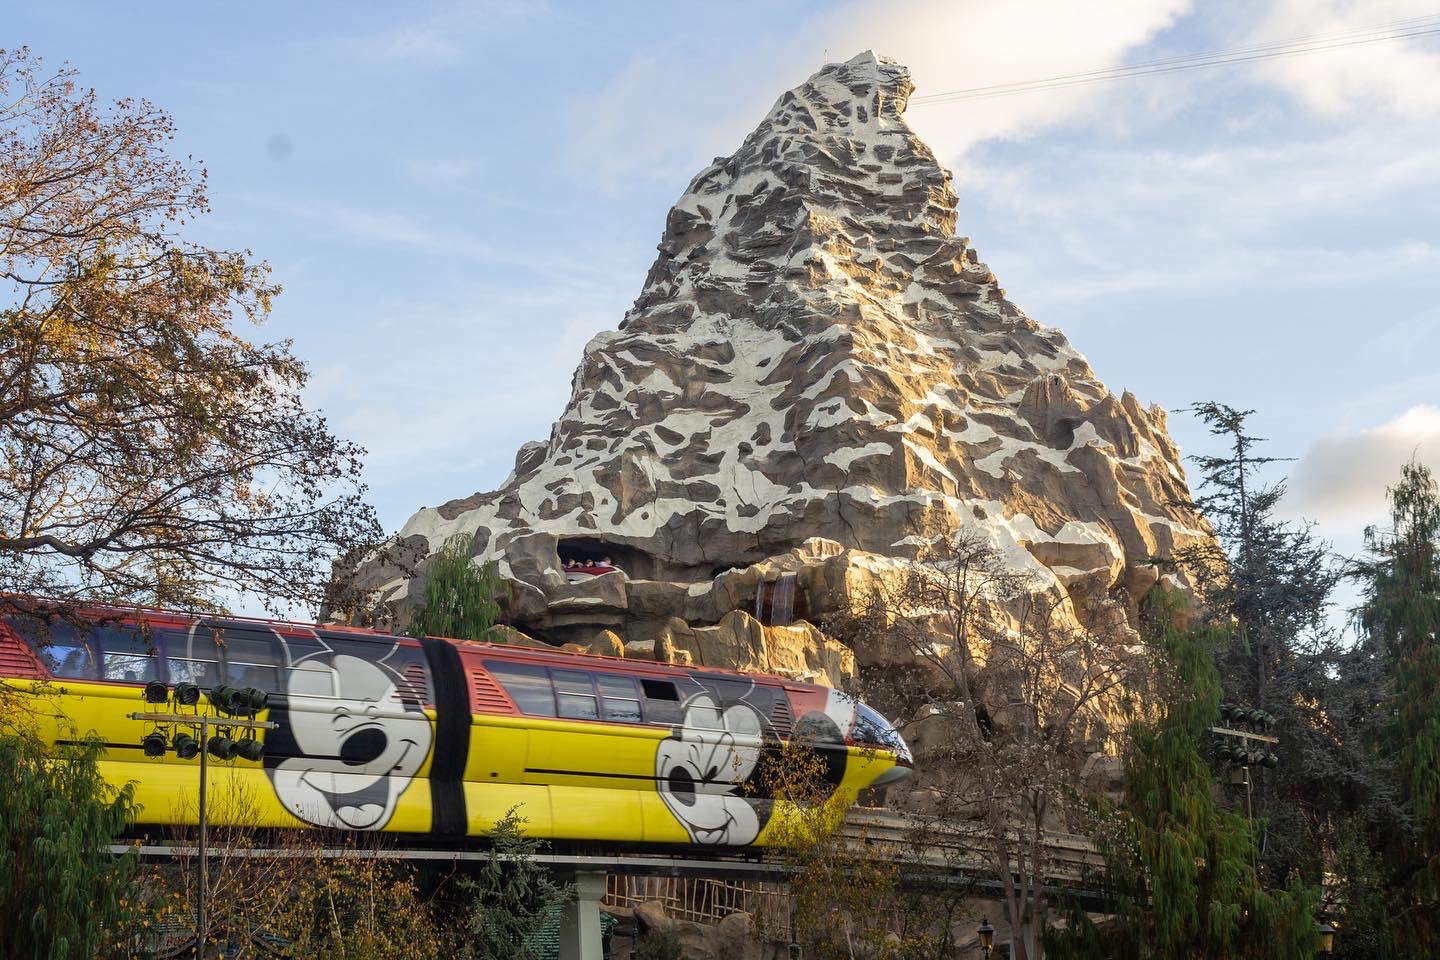 A yellow and red monorail printed with Mickey Mouse travels in front of the snowy peak of the Matterhorn Bobsleds ride under a soft blue sky